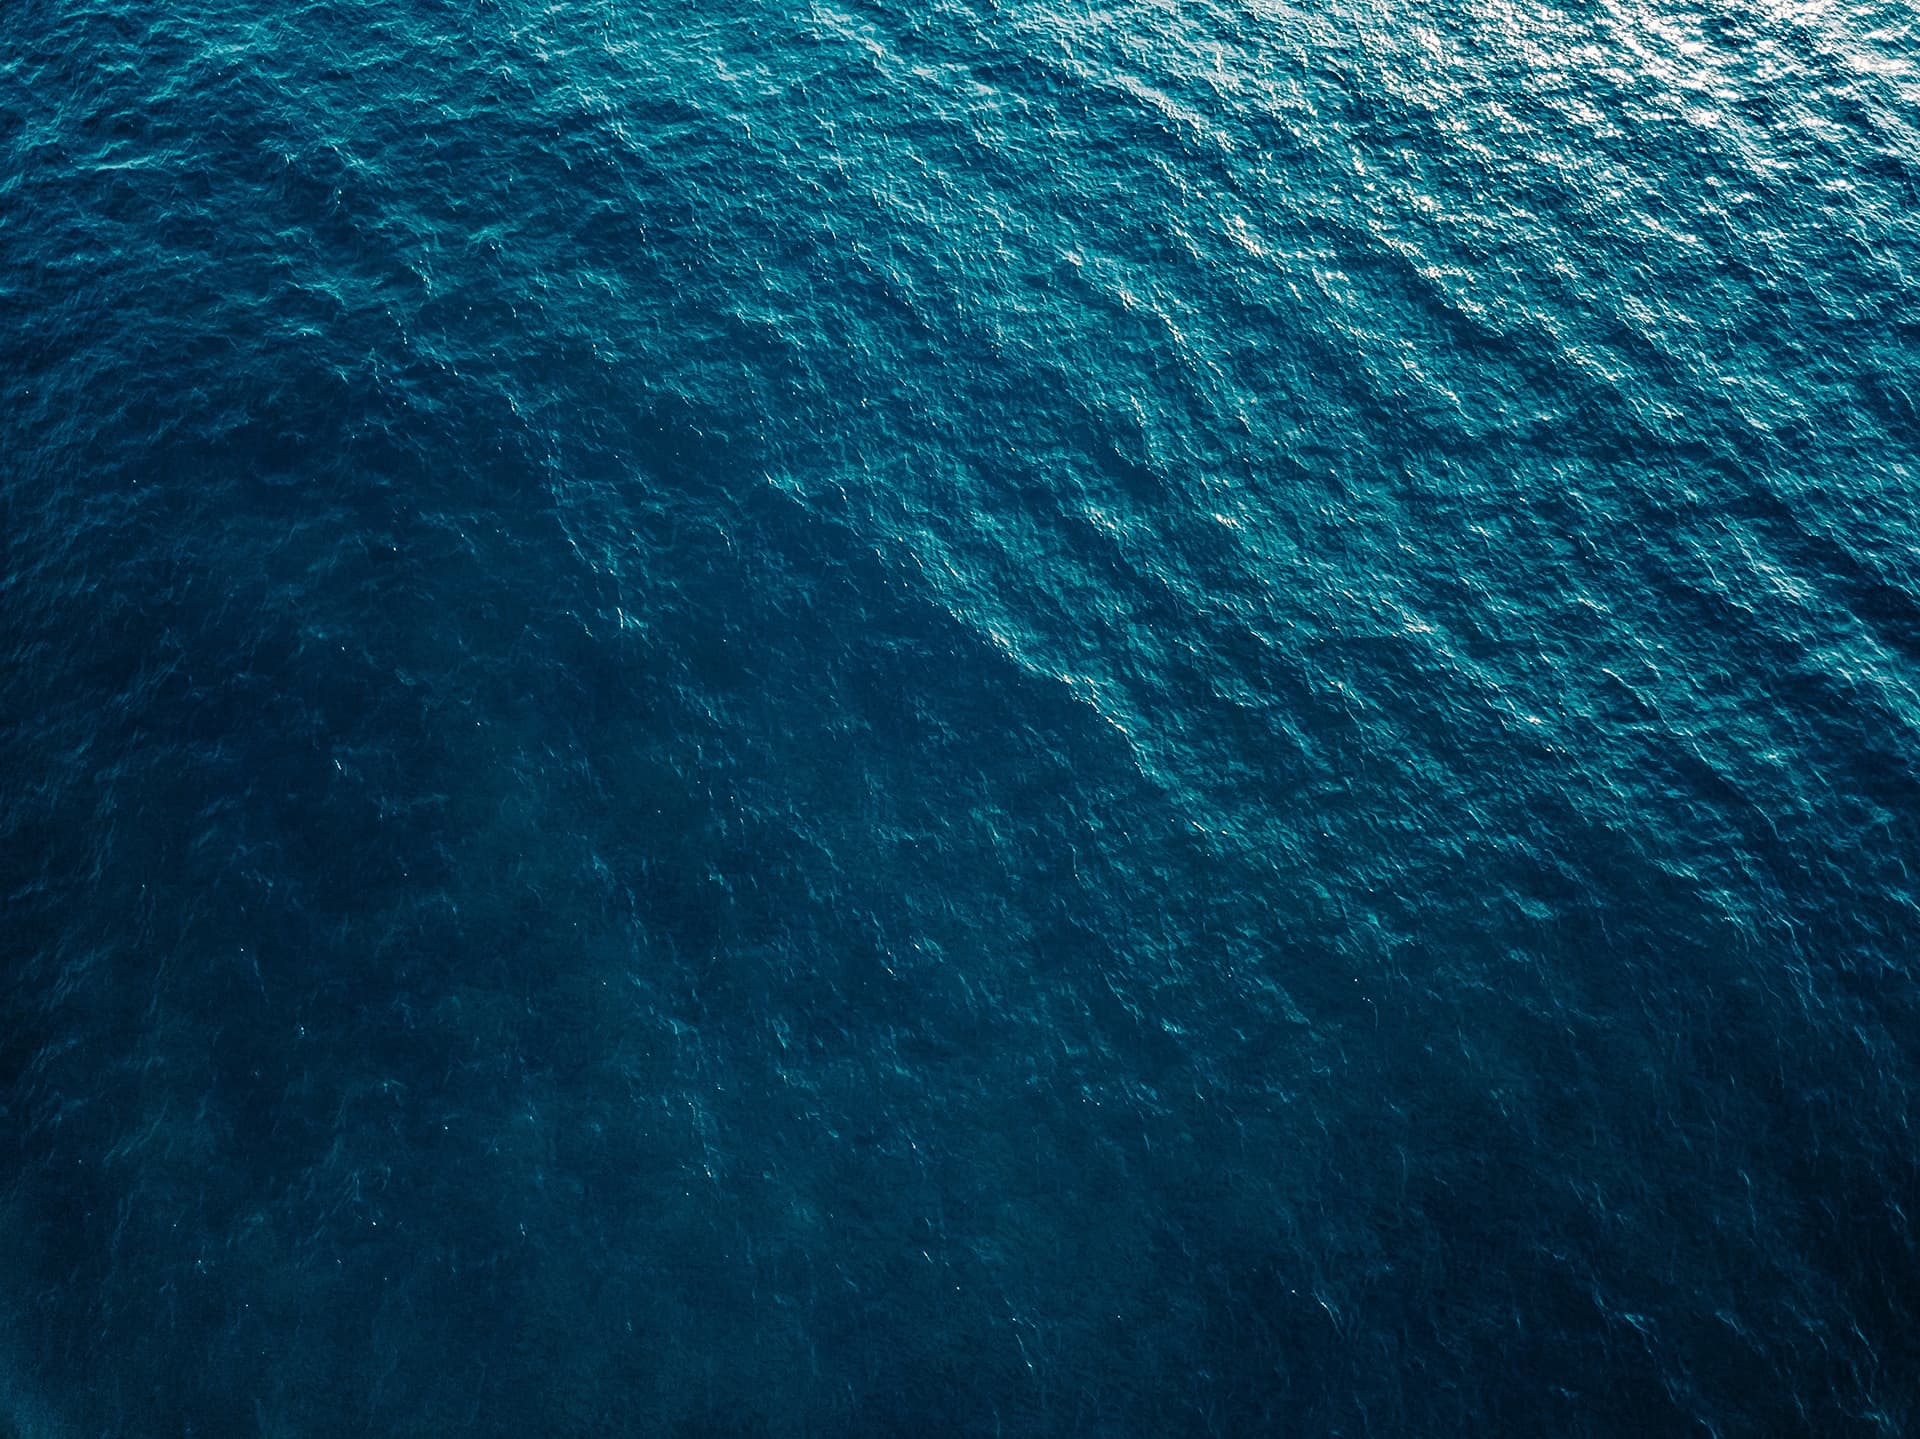 Image of Waves from Above